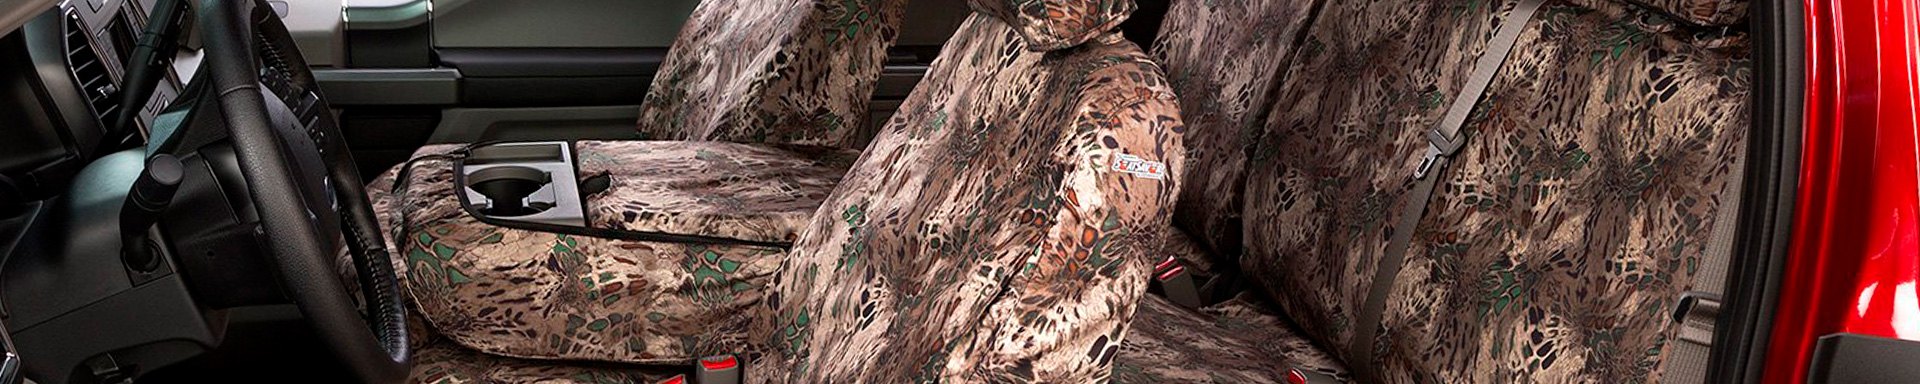 Add Rugged Protection To Your Seats With New Camo Fabric Seat Covers